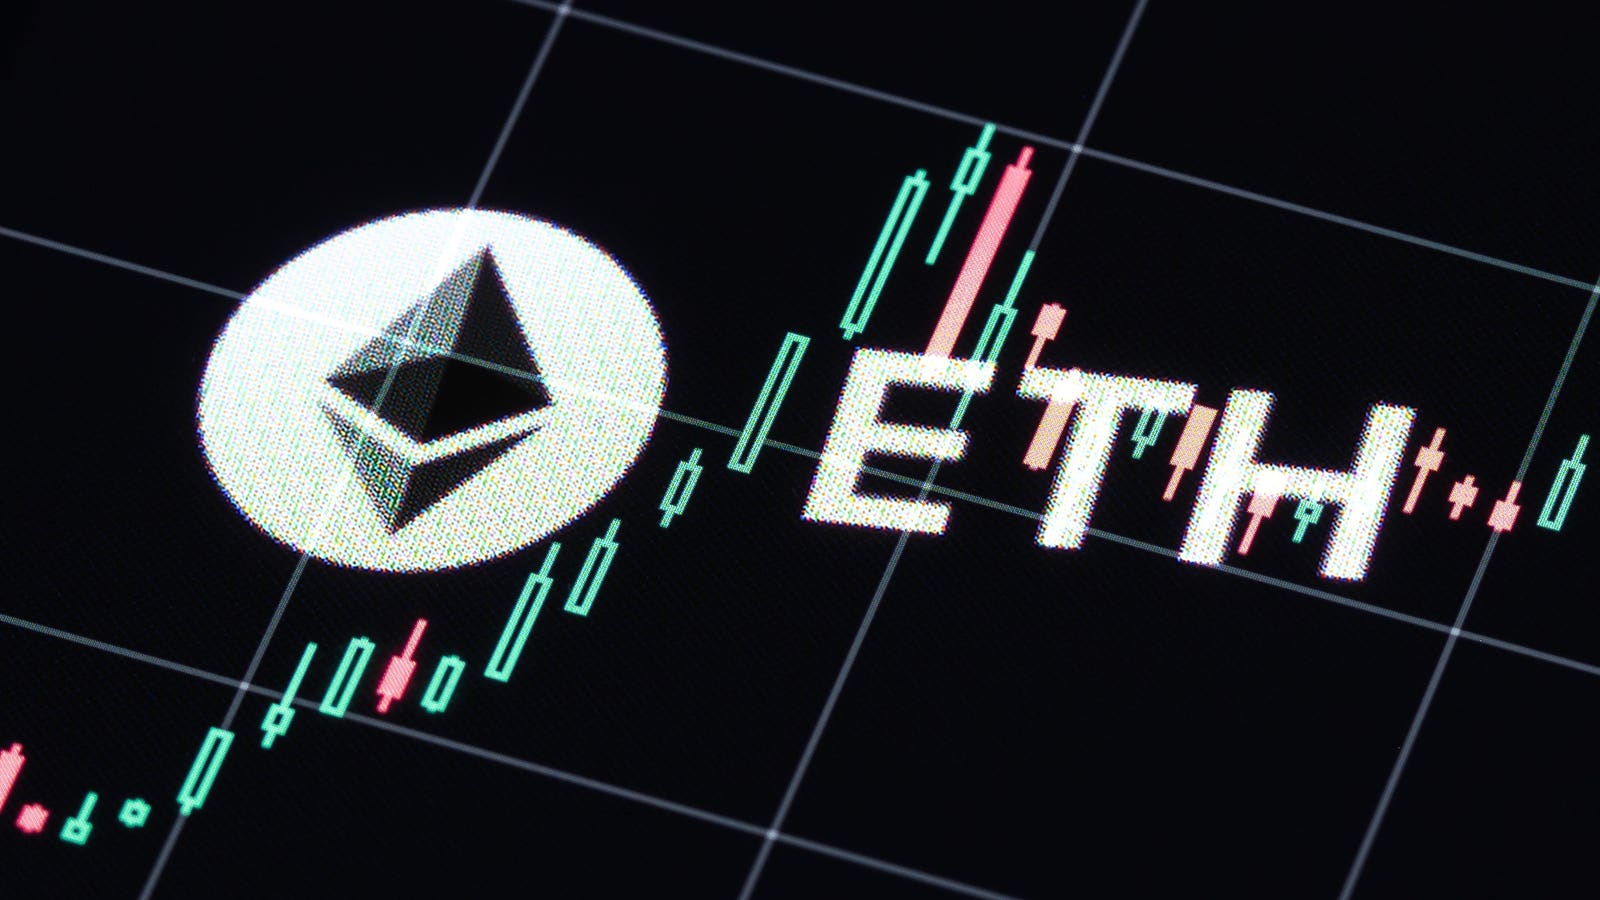 Speculation on Ether ETF approval boosts cryptocurrency prices